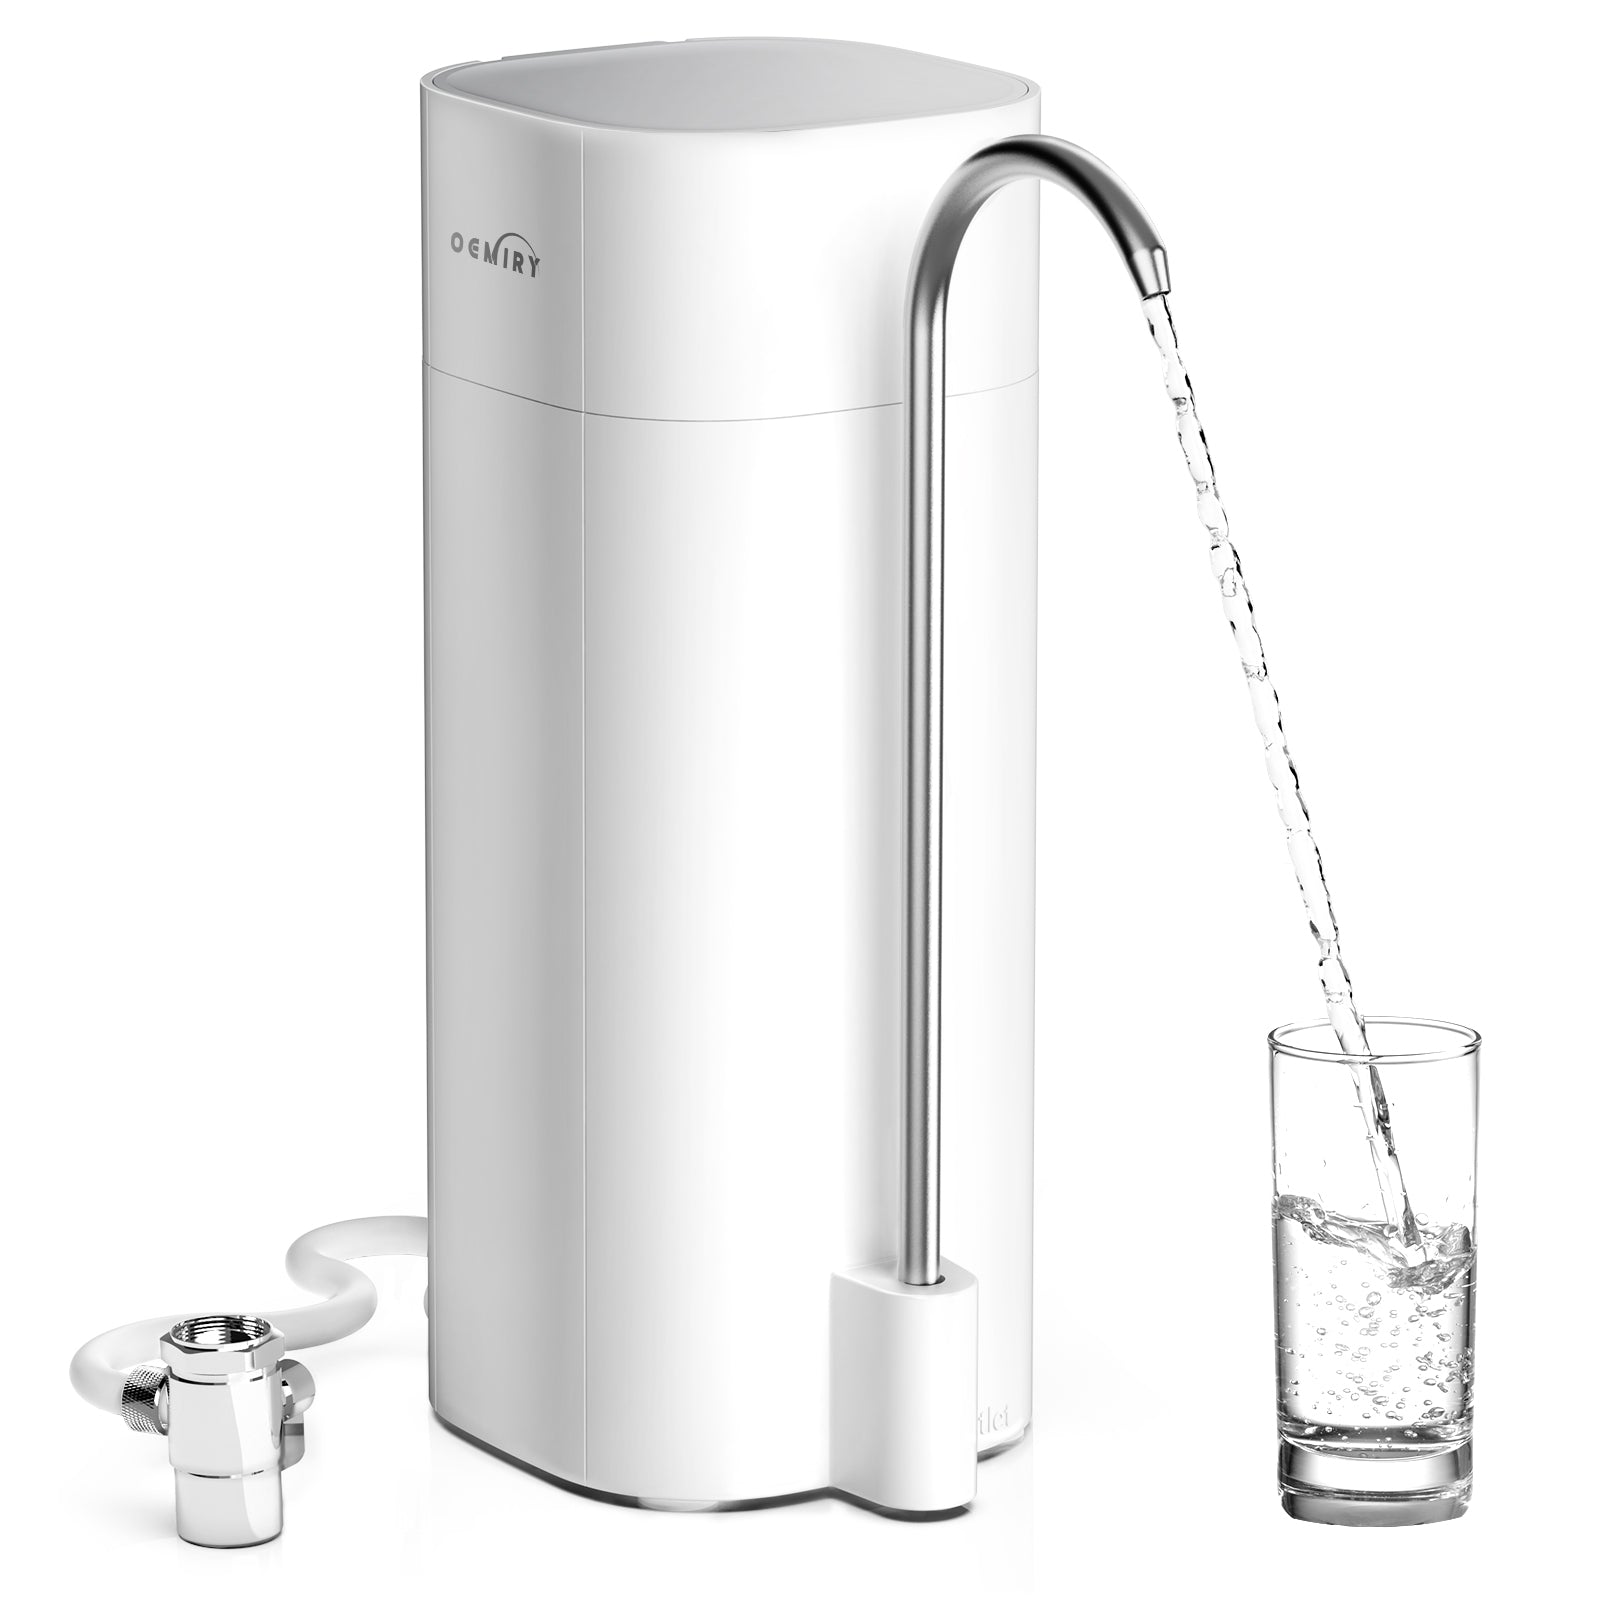 OEMIRY Countertop Water Filtration System CF02